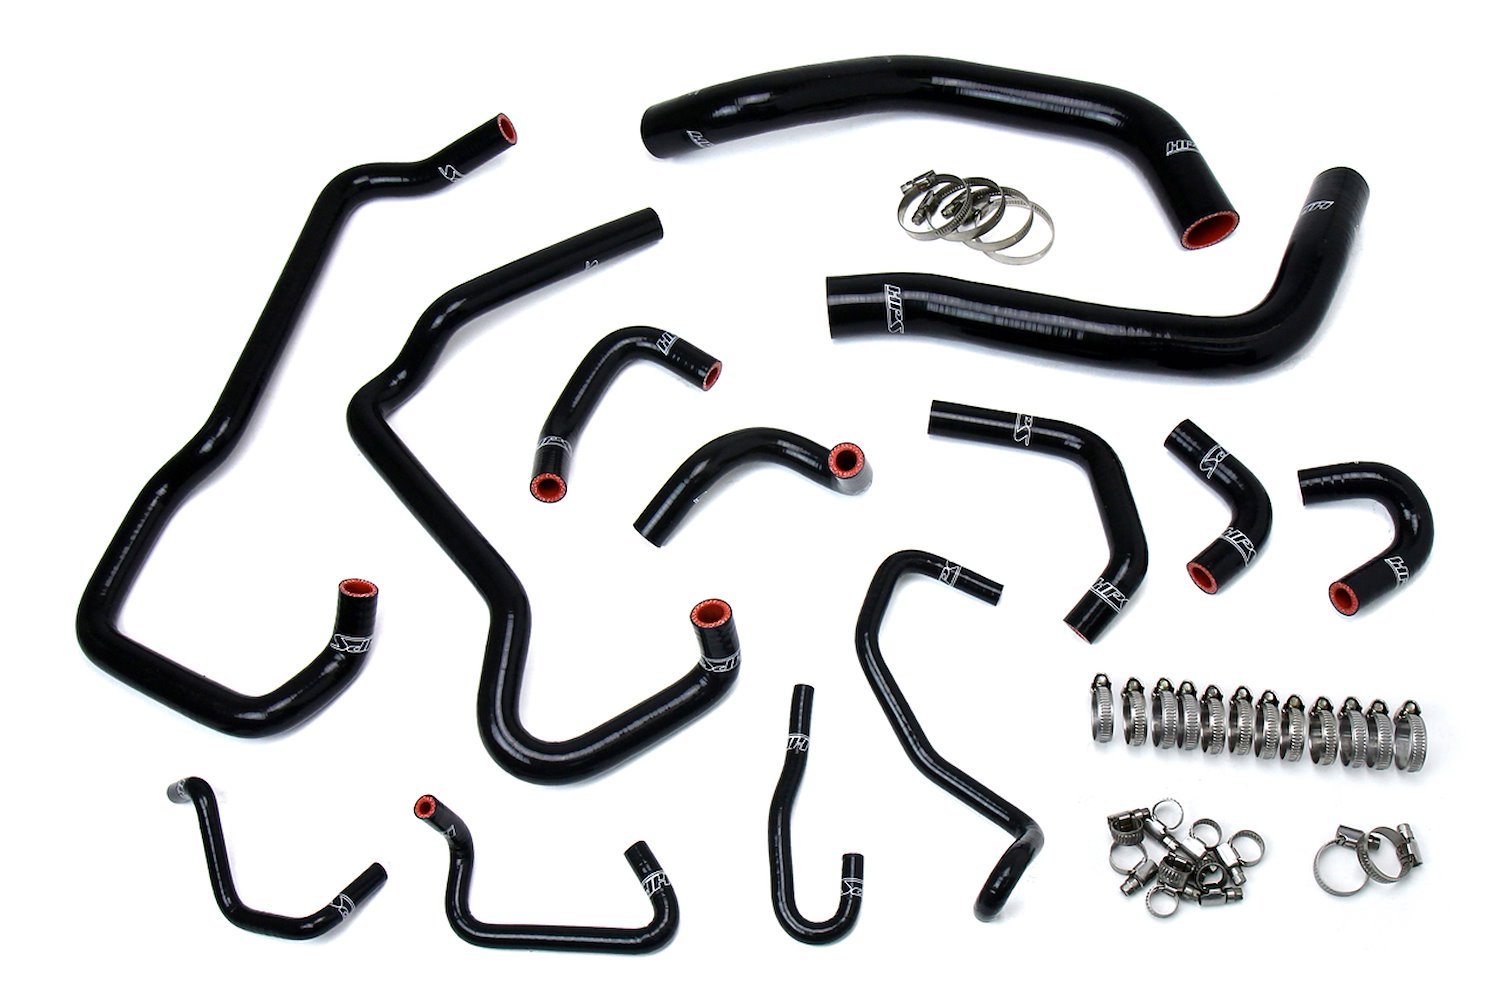 57-1581-BLK Coolant Hose Kit, High-Temp 3-Ply Reinforced Silicone, Replace Rubber Radiator Heater Coolant Hoses